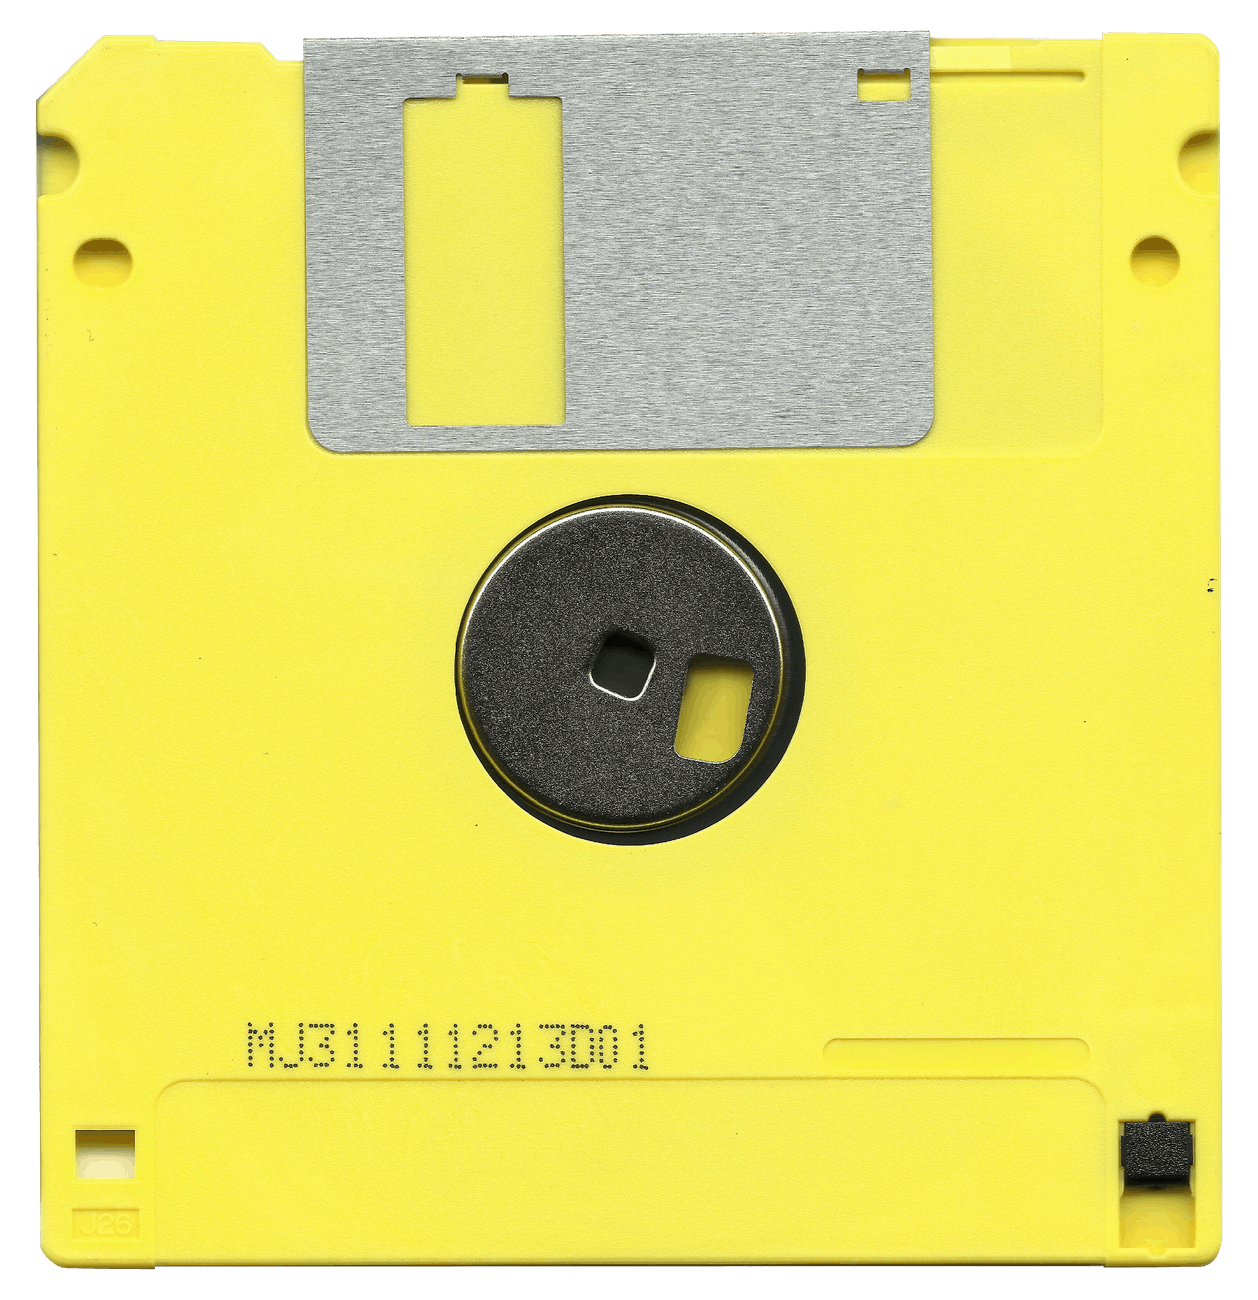 floppy-disk-computer-163161.png